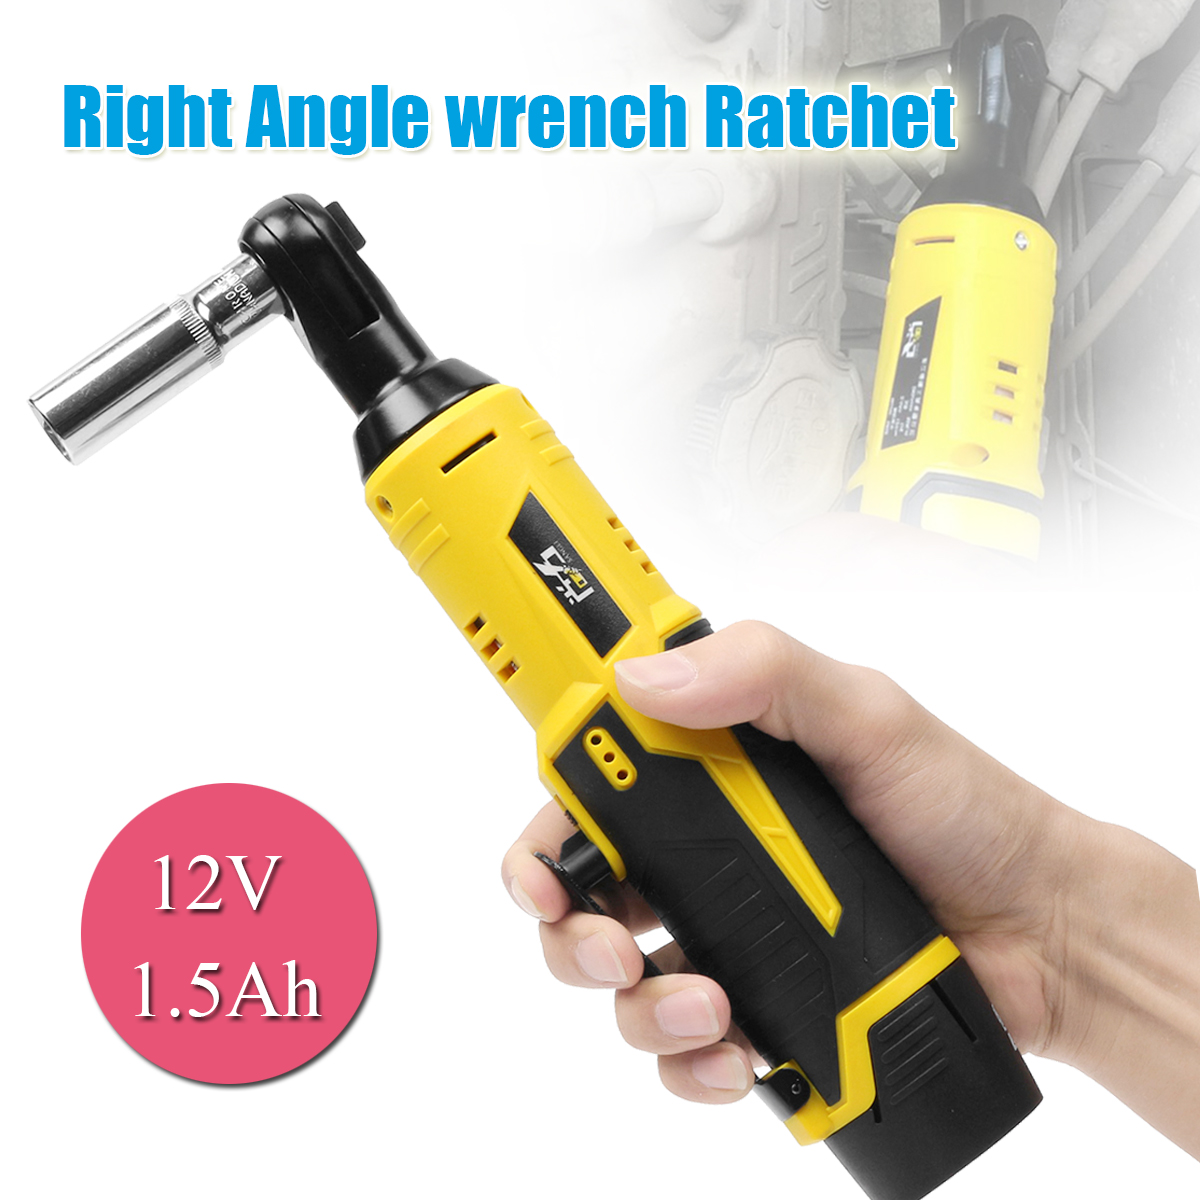 12V-35NM-LED-Cordless-Electric-Ratchet-Wrench-Rechargeable-Right-Angle-Wrench-Tools-Li-ion-Battery-1308198-1